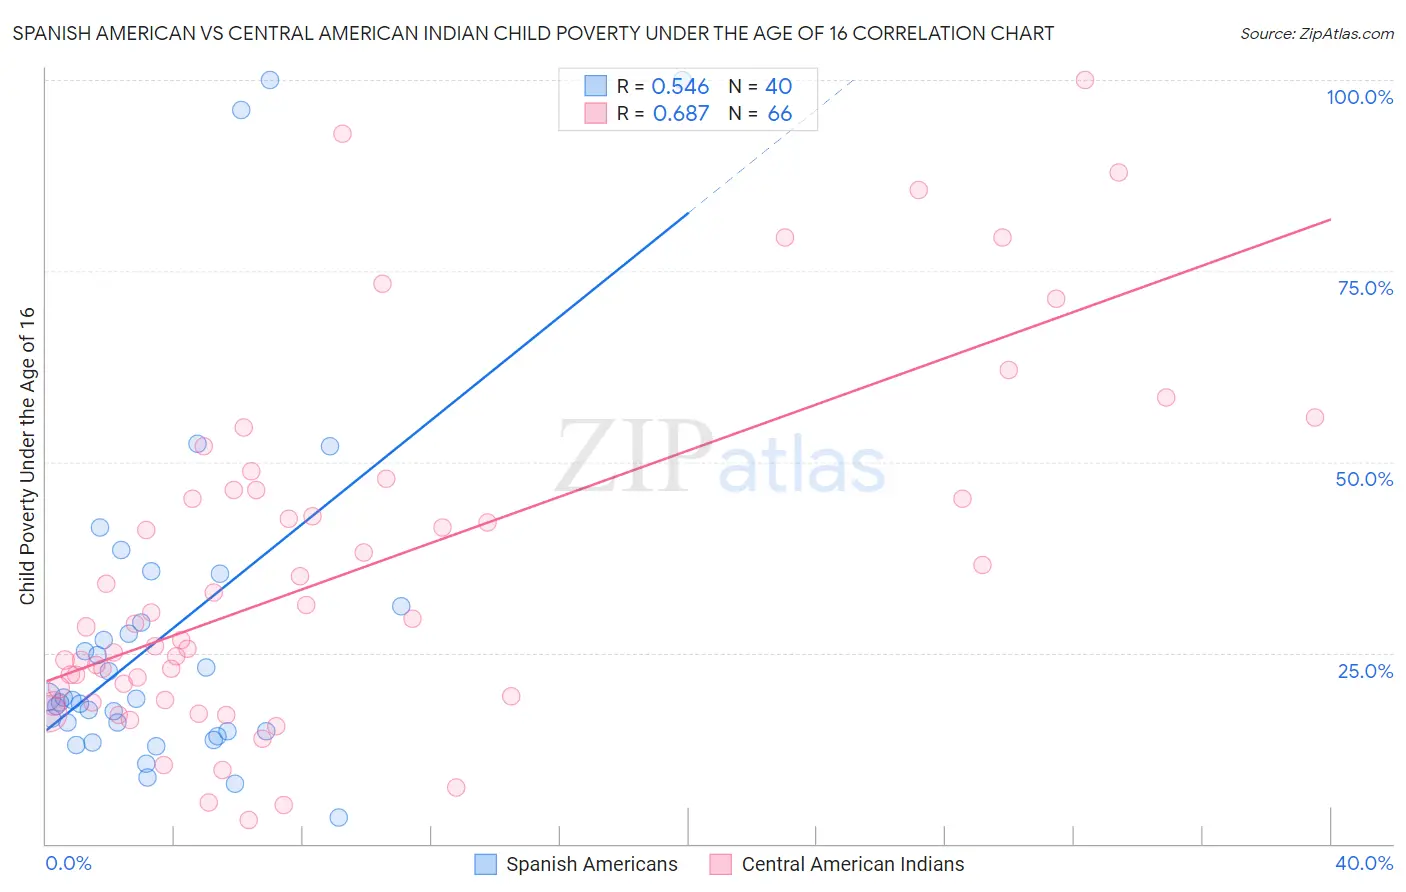 Spanish American vs Central American Indian Child Poverty Under the Age of 16